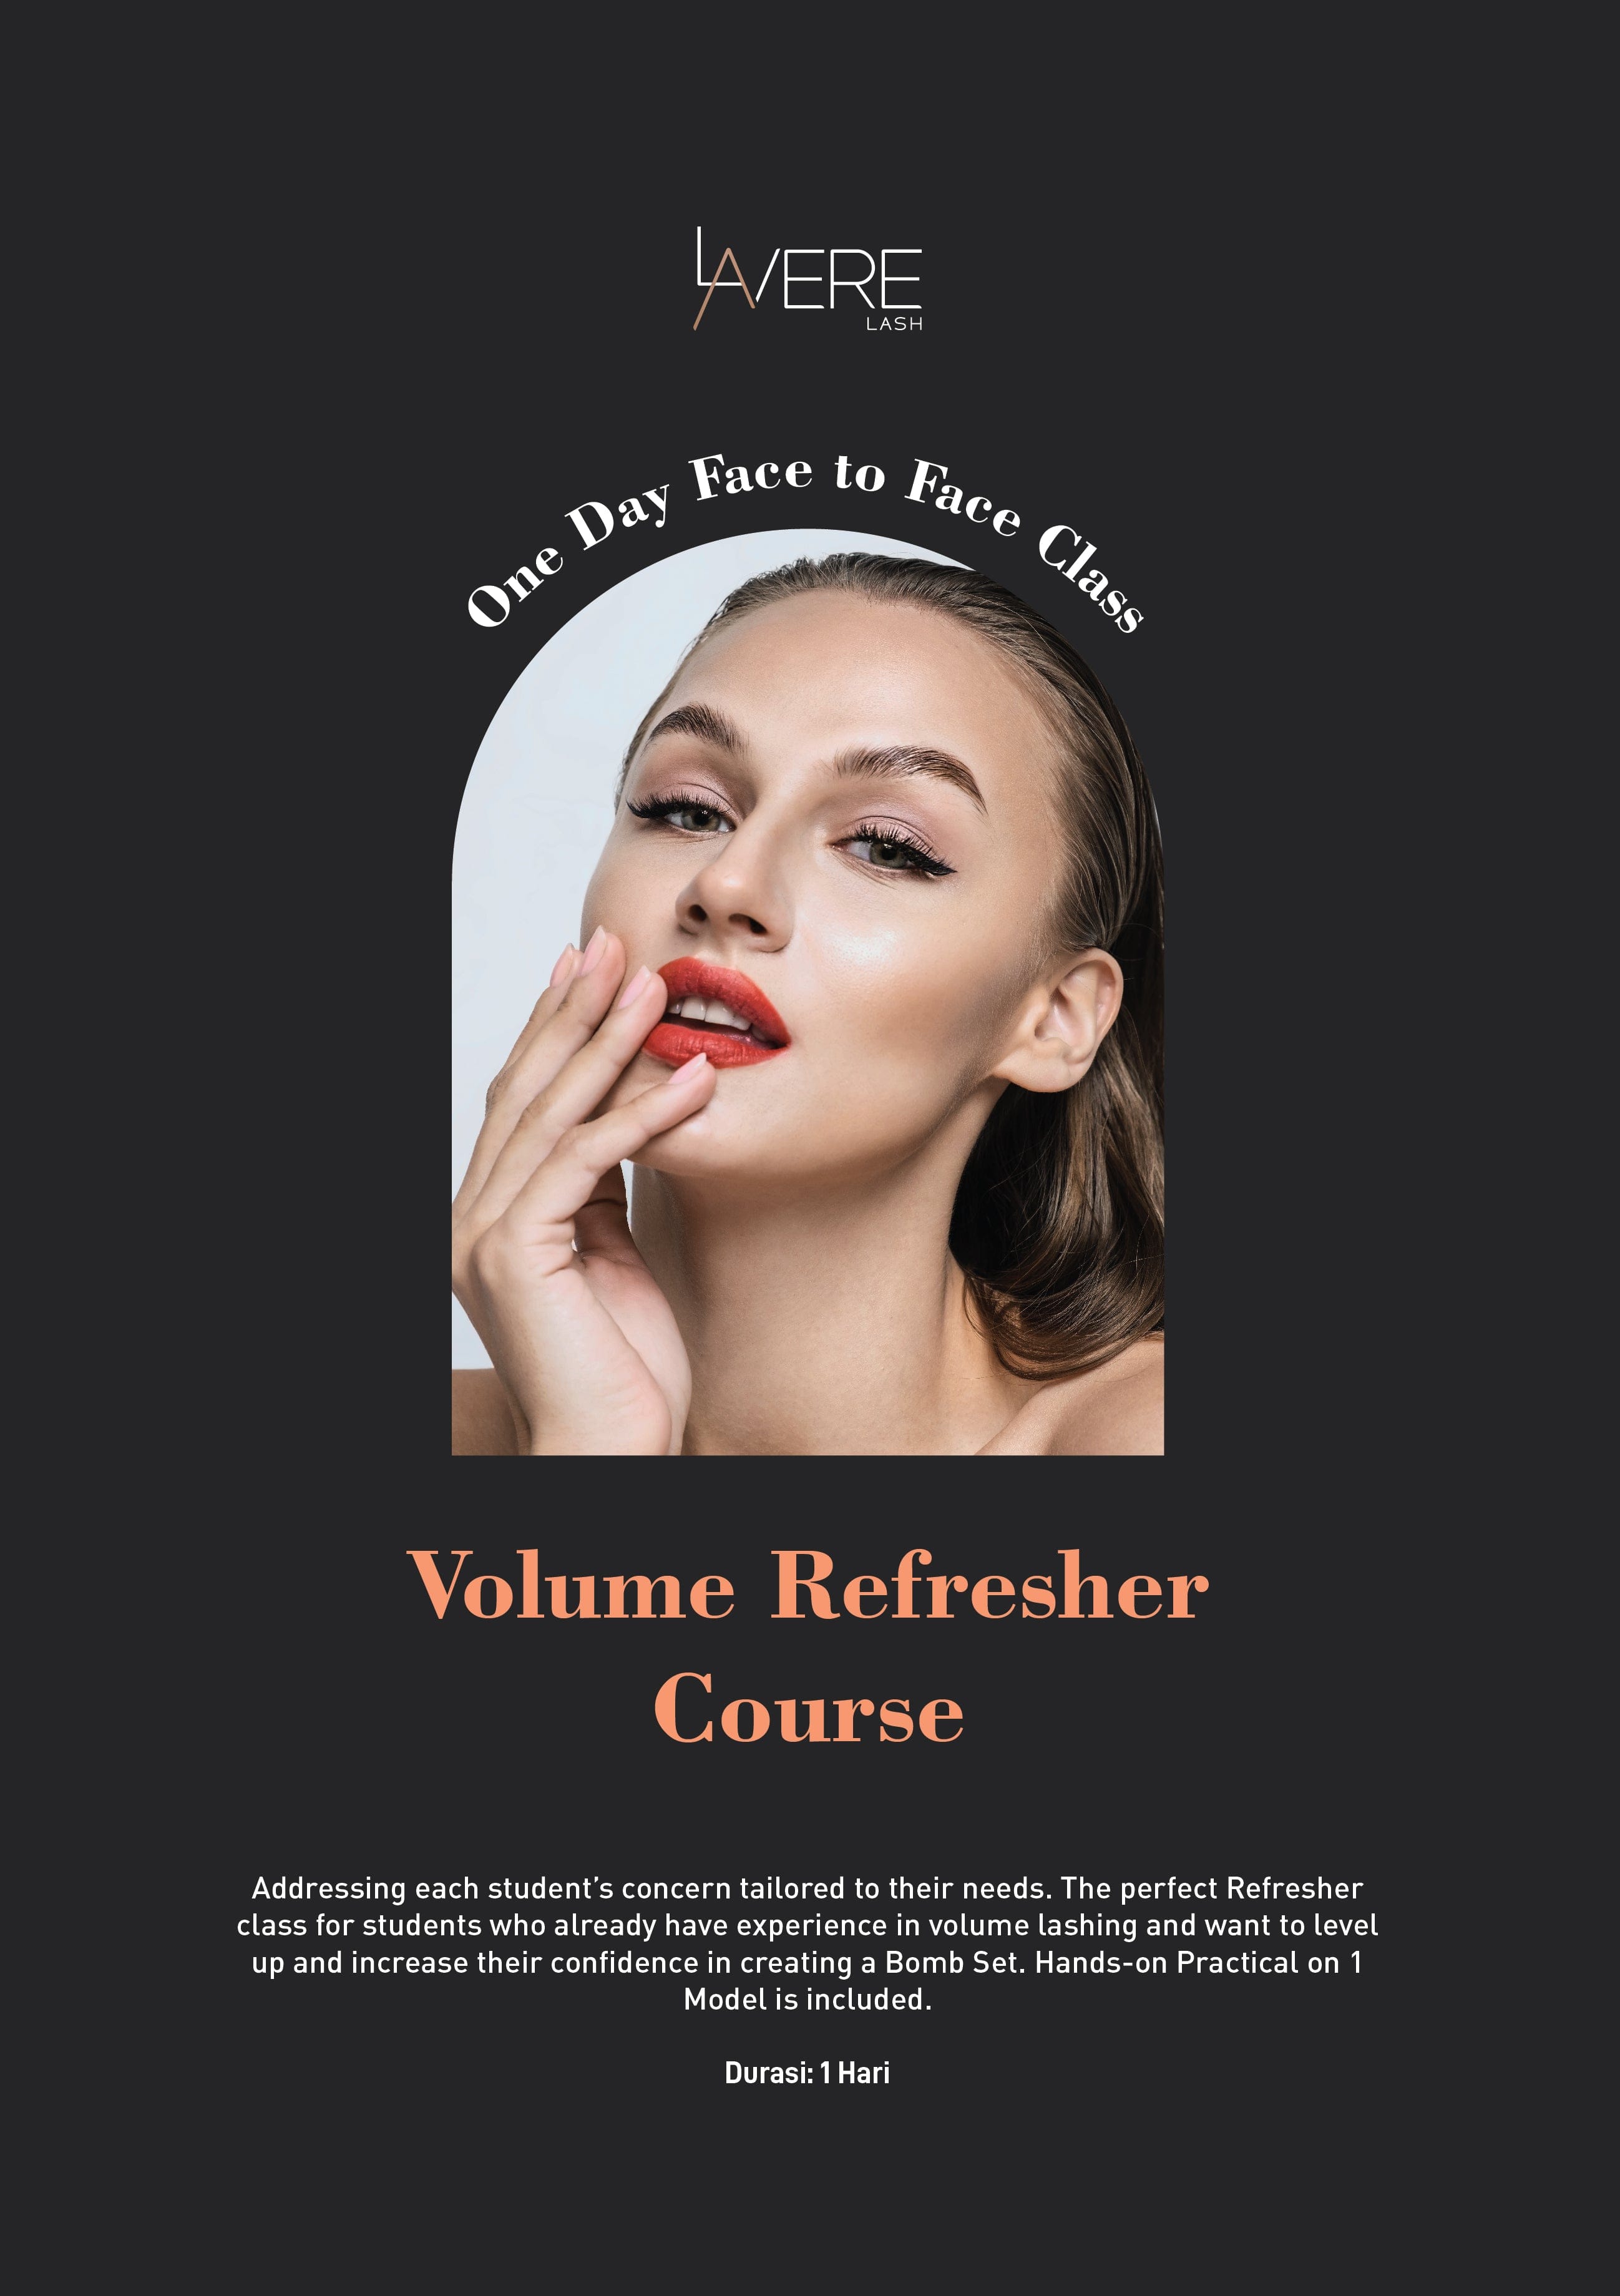 Volume Refresher Course - One Day Face To Face Offline Class - Lavere Lash